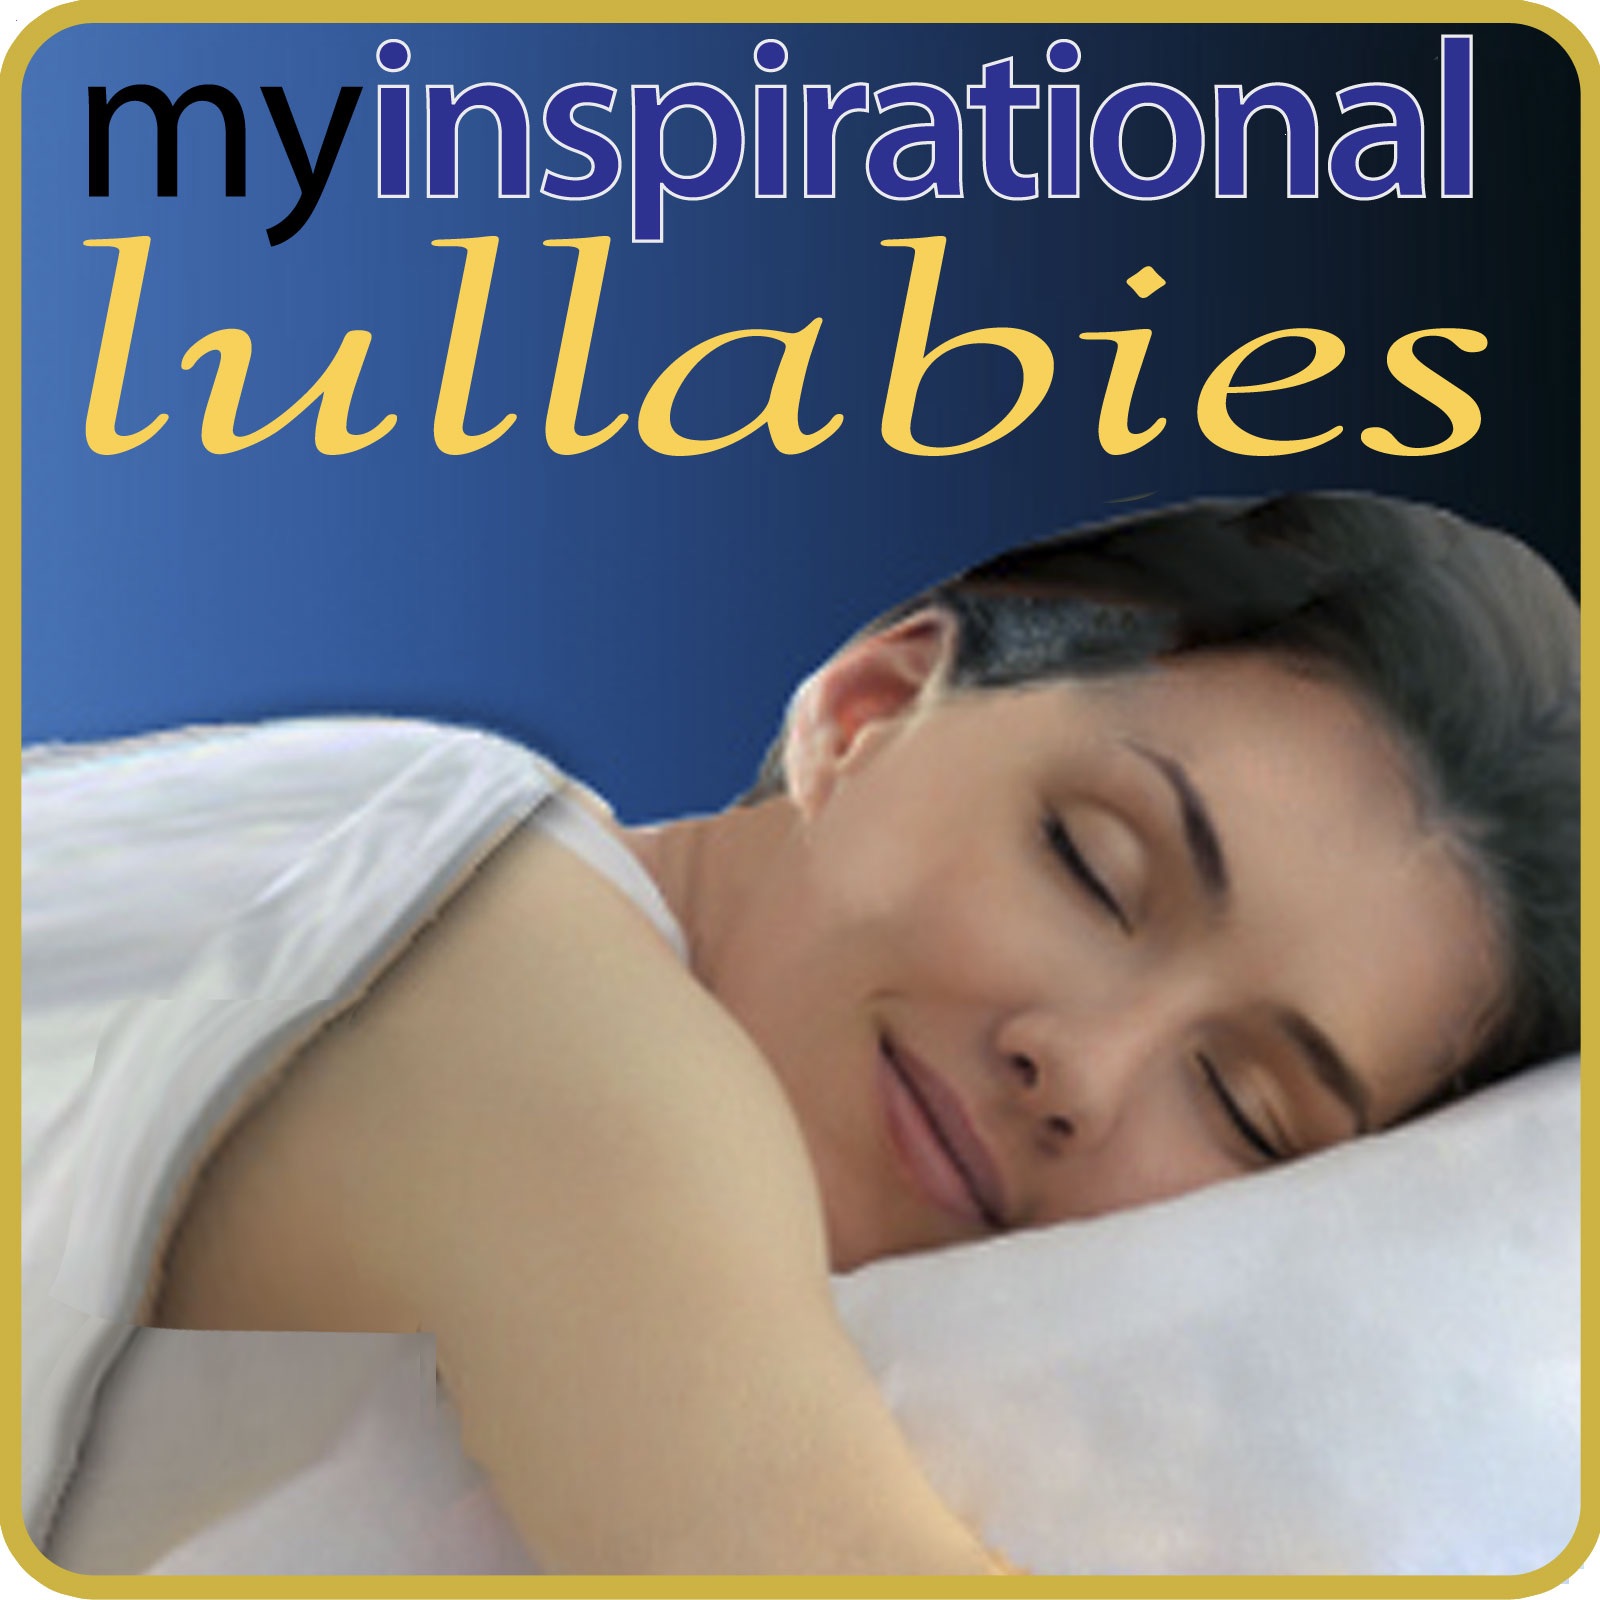 My Inspirational Lullabies - New Original Lullabies for Dreamers of All Ages by Robin Boudreau Palmer on iTunes - 1600x1600sr